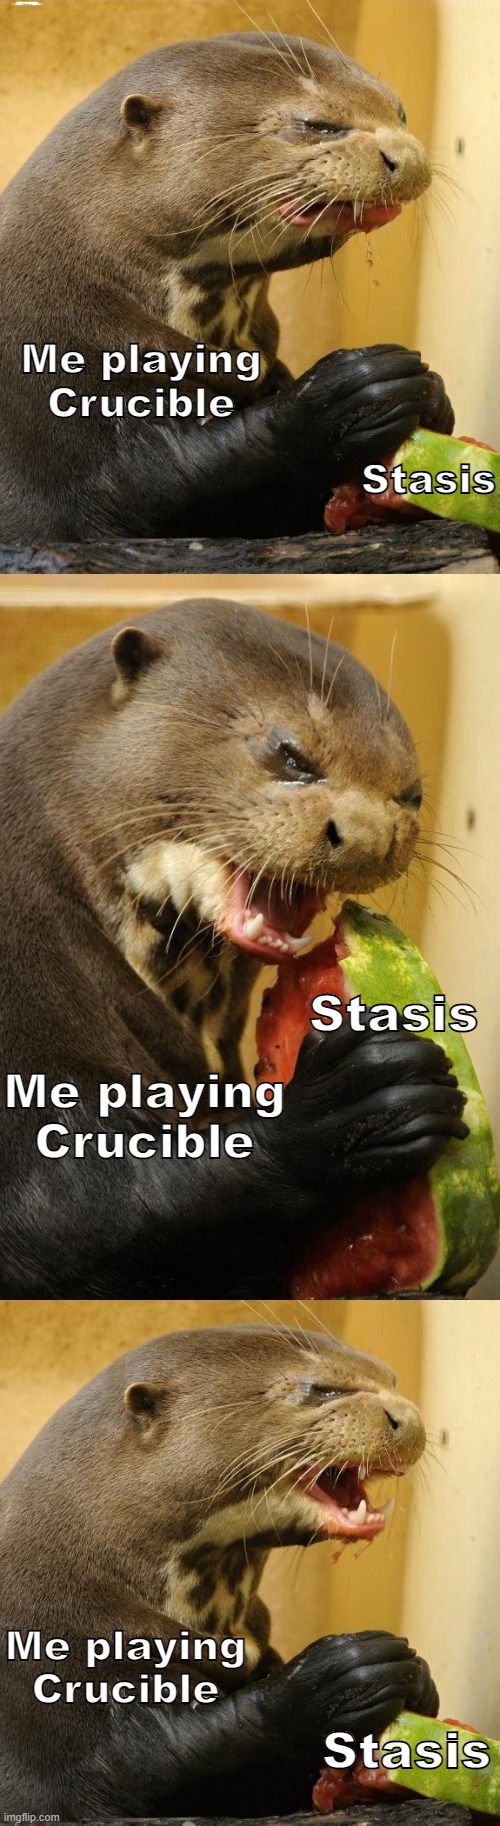 Current State Of Destiny 2 | Me playing Crucible; Stasis; Stasis; Me playing Crucible; Me playing Crucible; Stasis | image tagged in destiny 2,destiny,funny,funny memes,otters | made w/ Imgflip meme maker